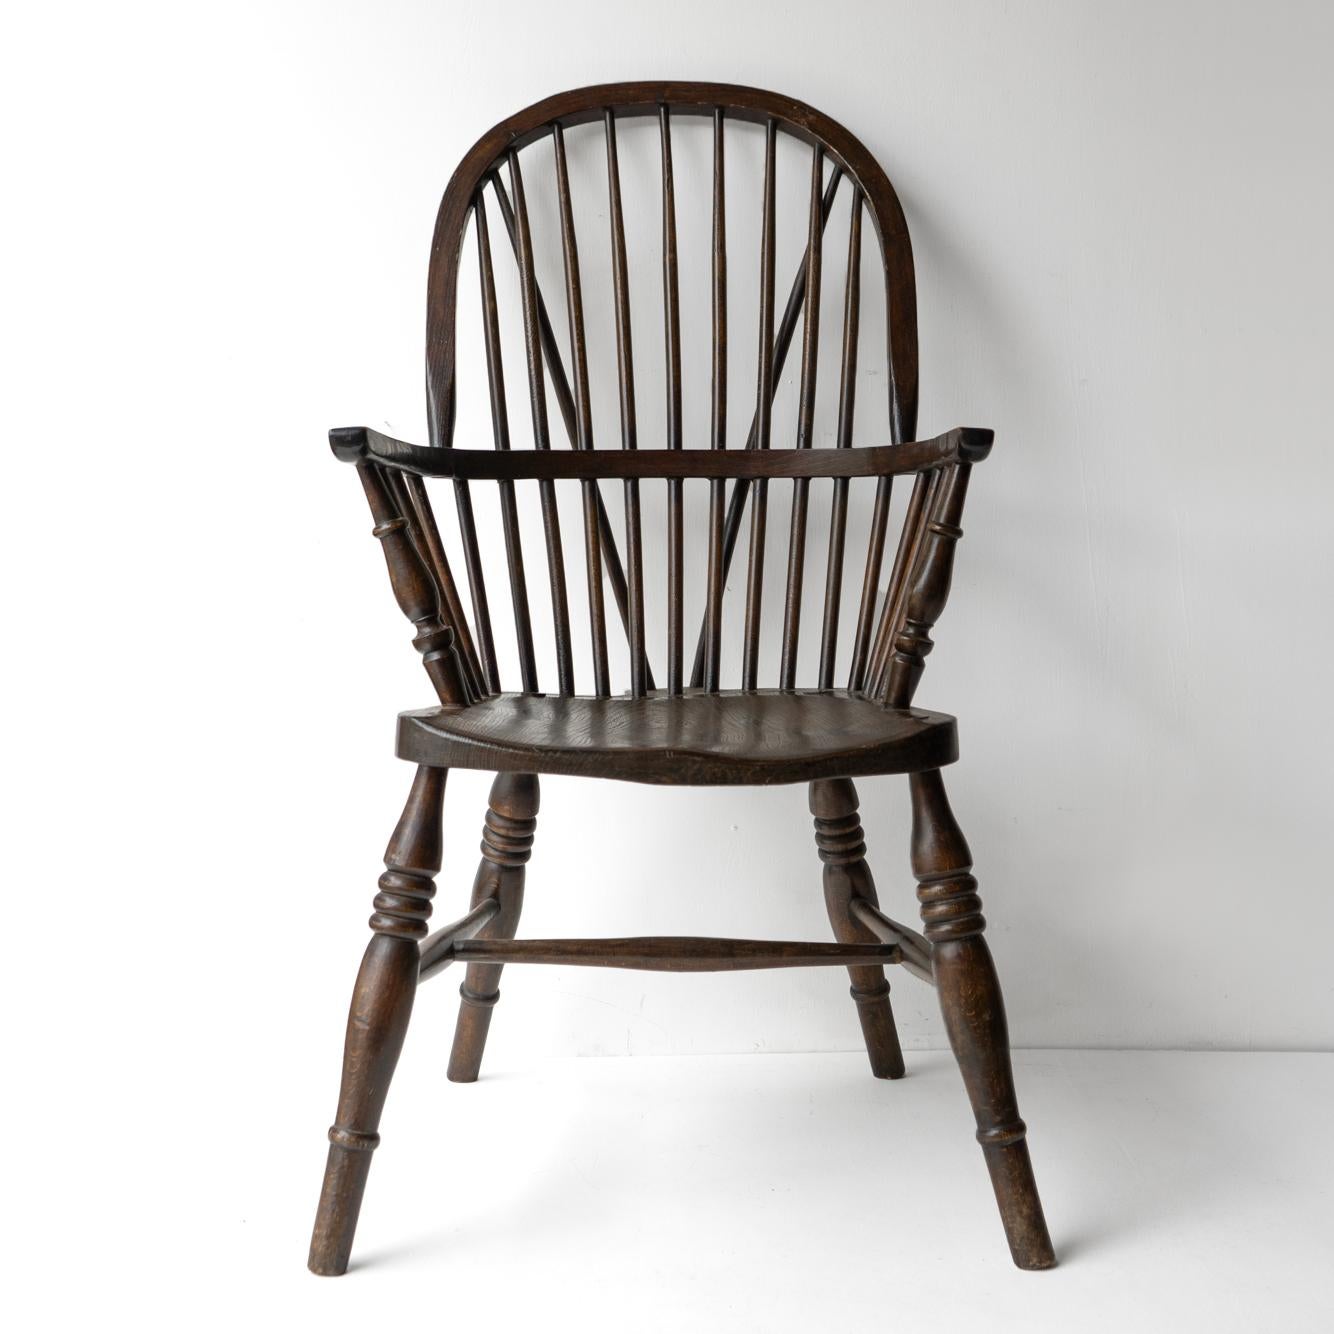 WINDSOR STICK BACK CHAIR

Simple stylish lines with a large hoop back, generous seat and arms and turned legs separated by a simple H- stretcher

Completely handmade and charming slightly off with the angles, providing a slightly primitive